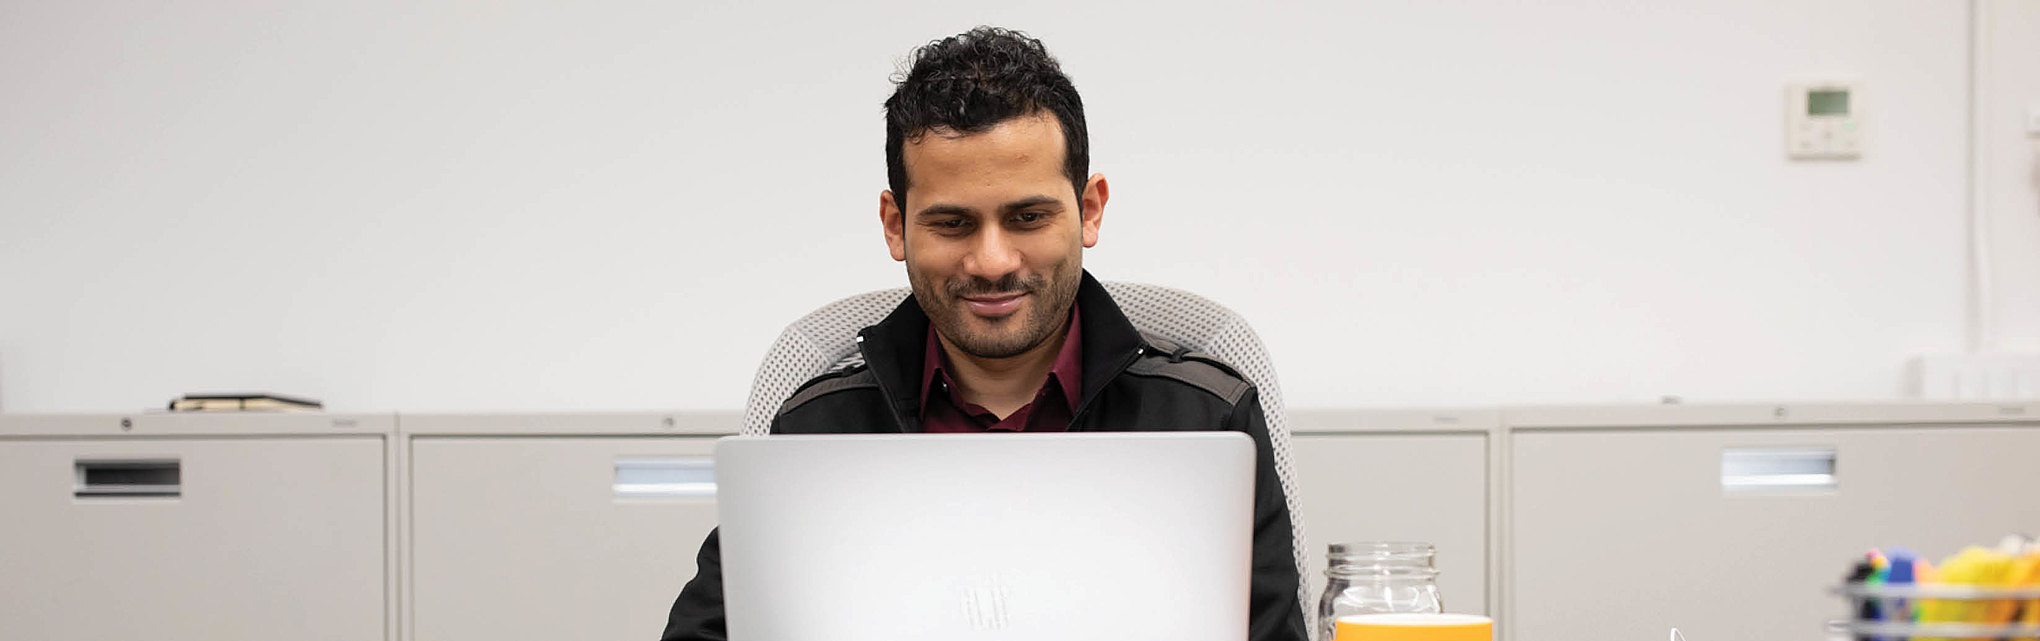 On-Ramps search analyst Saad Qureshi works on his laptop while seated at a desk.